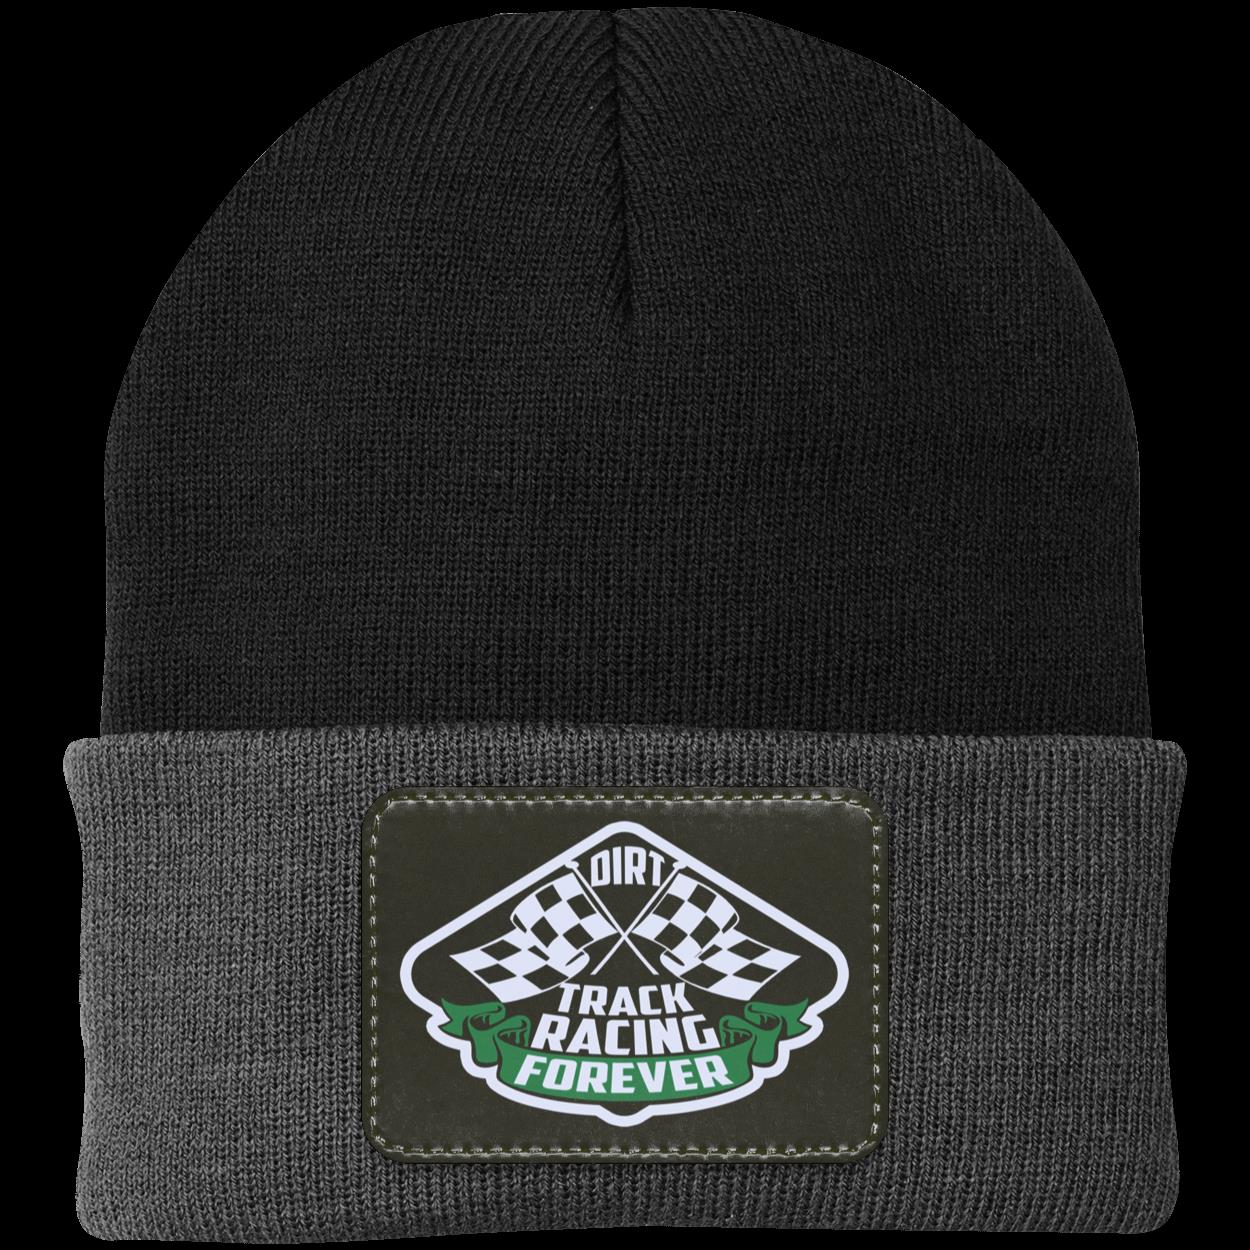 Dirt Track Racing Forever Patched Knit Cap V1